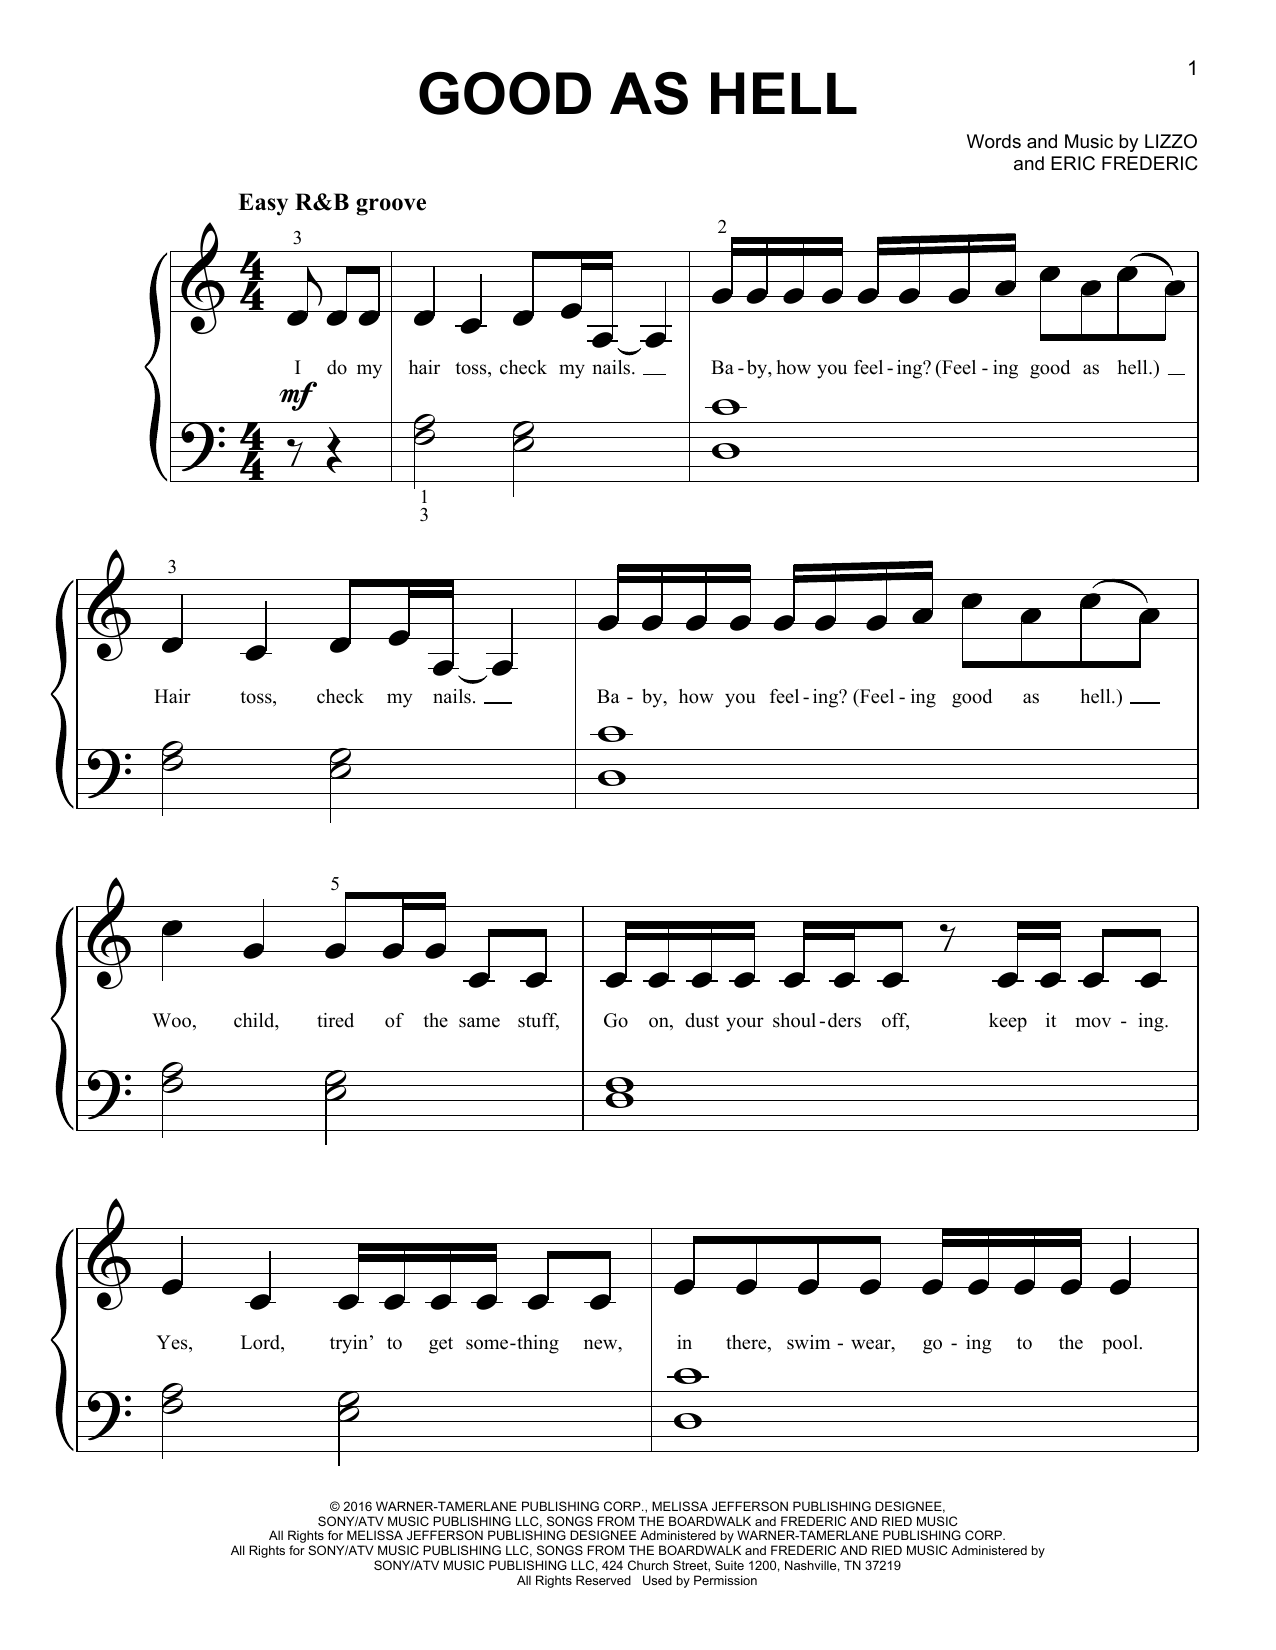 Download Lizzo Good As Hell Sheet Music